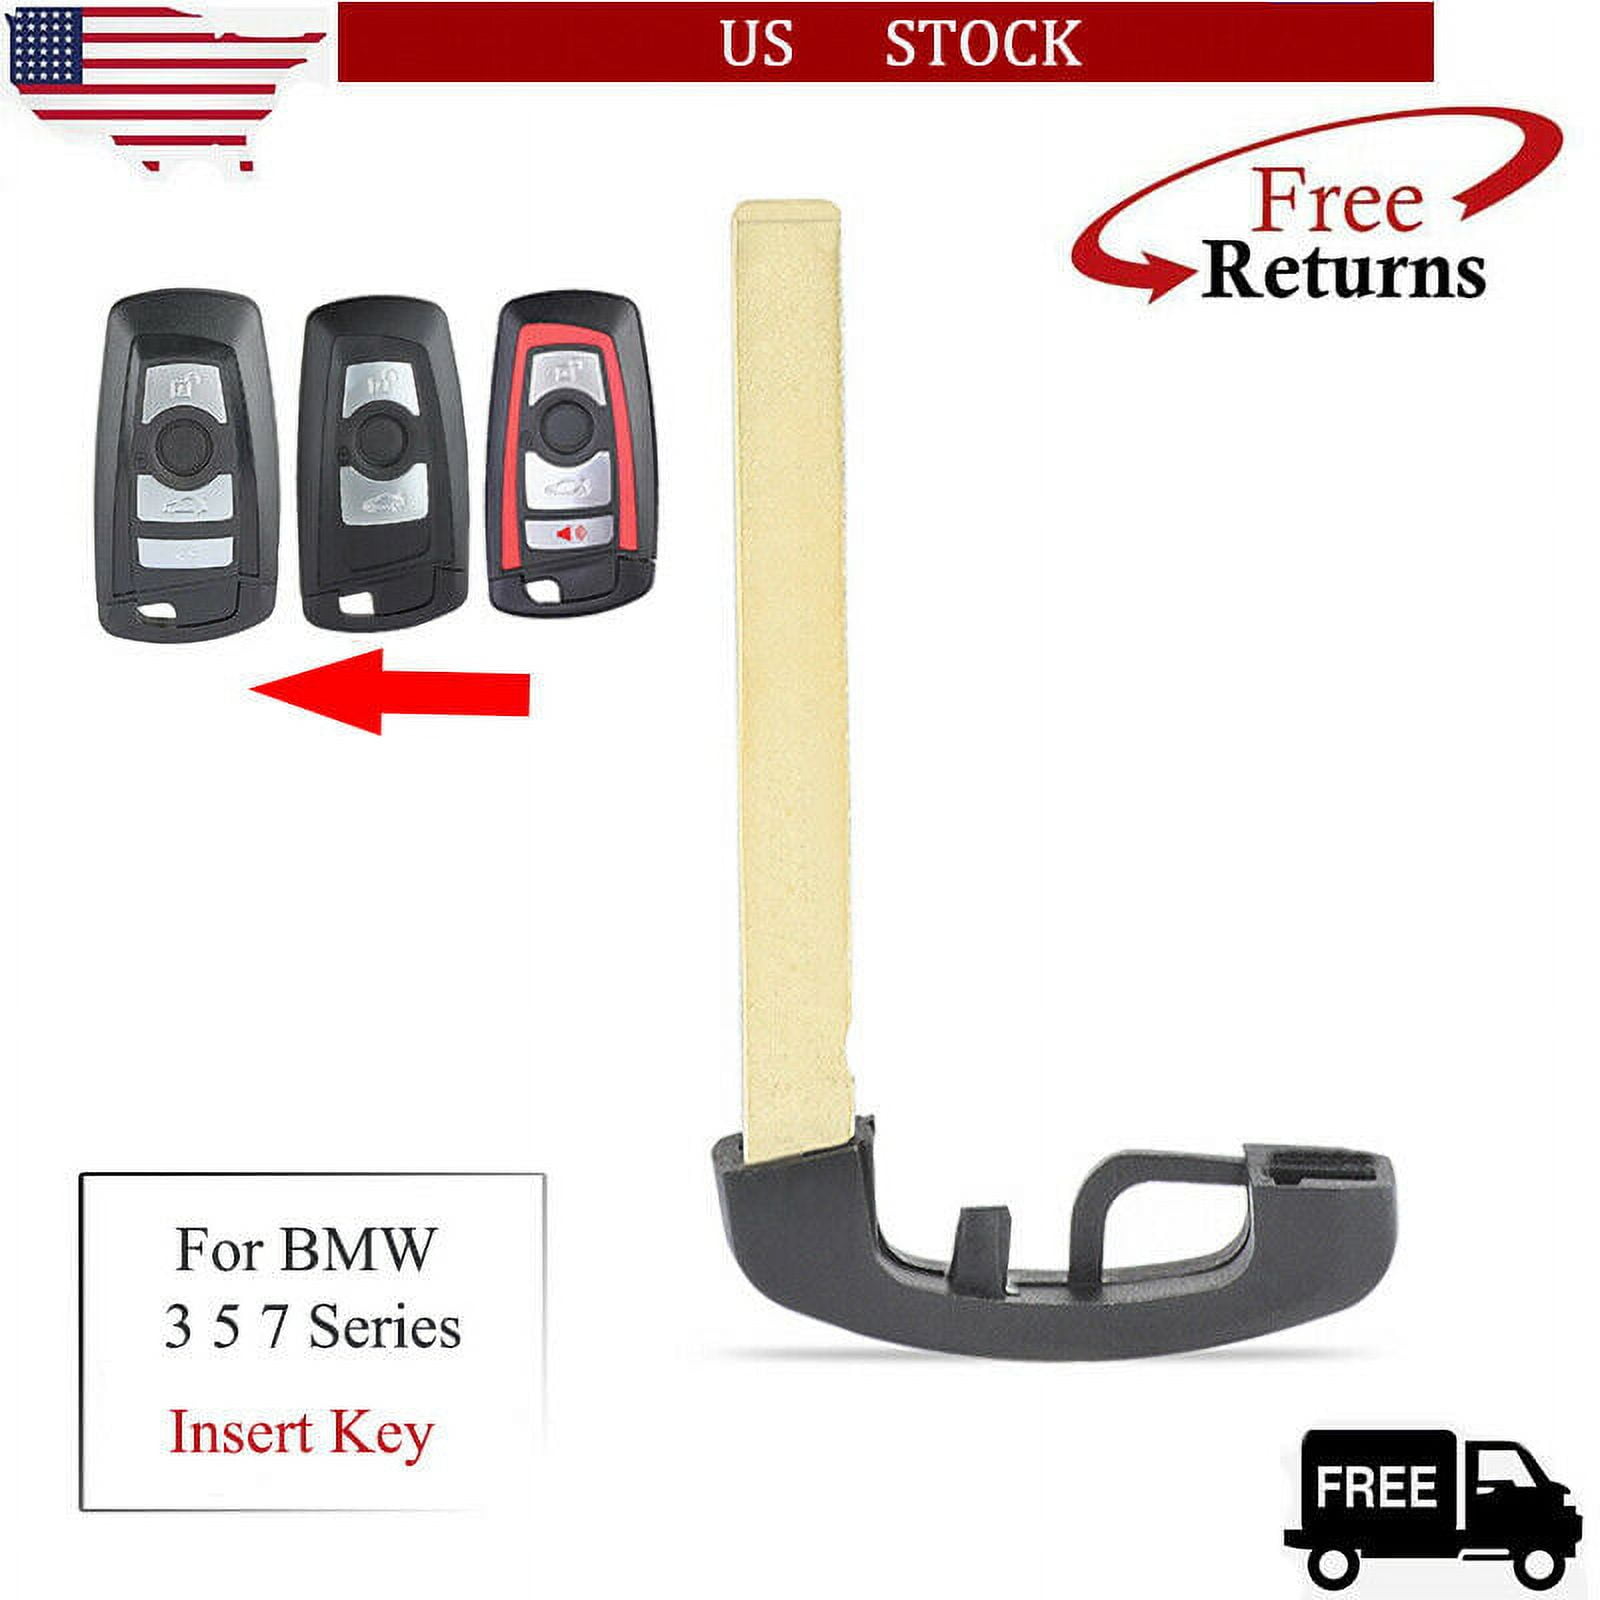 BMW Keychain Holder Protector Cover Bag For X1 7 Series, X6 X6, F15 F16,  G30 G11, M3 M5, 520 525, 1 6 Series Durable Keys Automotive Case From  Quak11, $22.24 | DHgate.Com